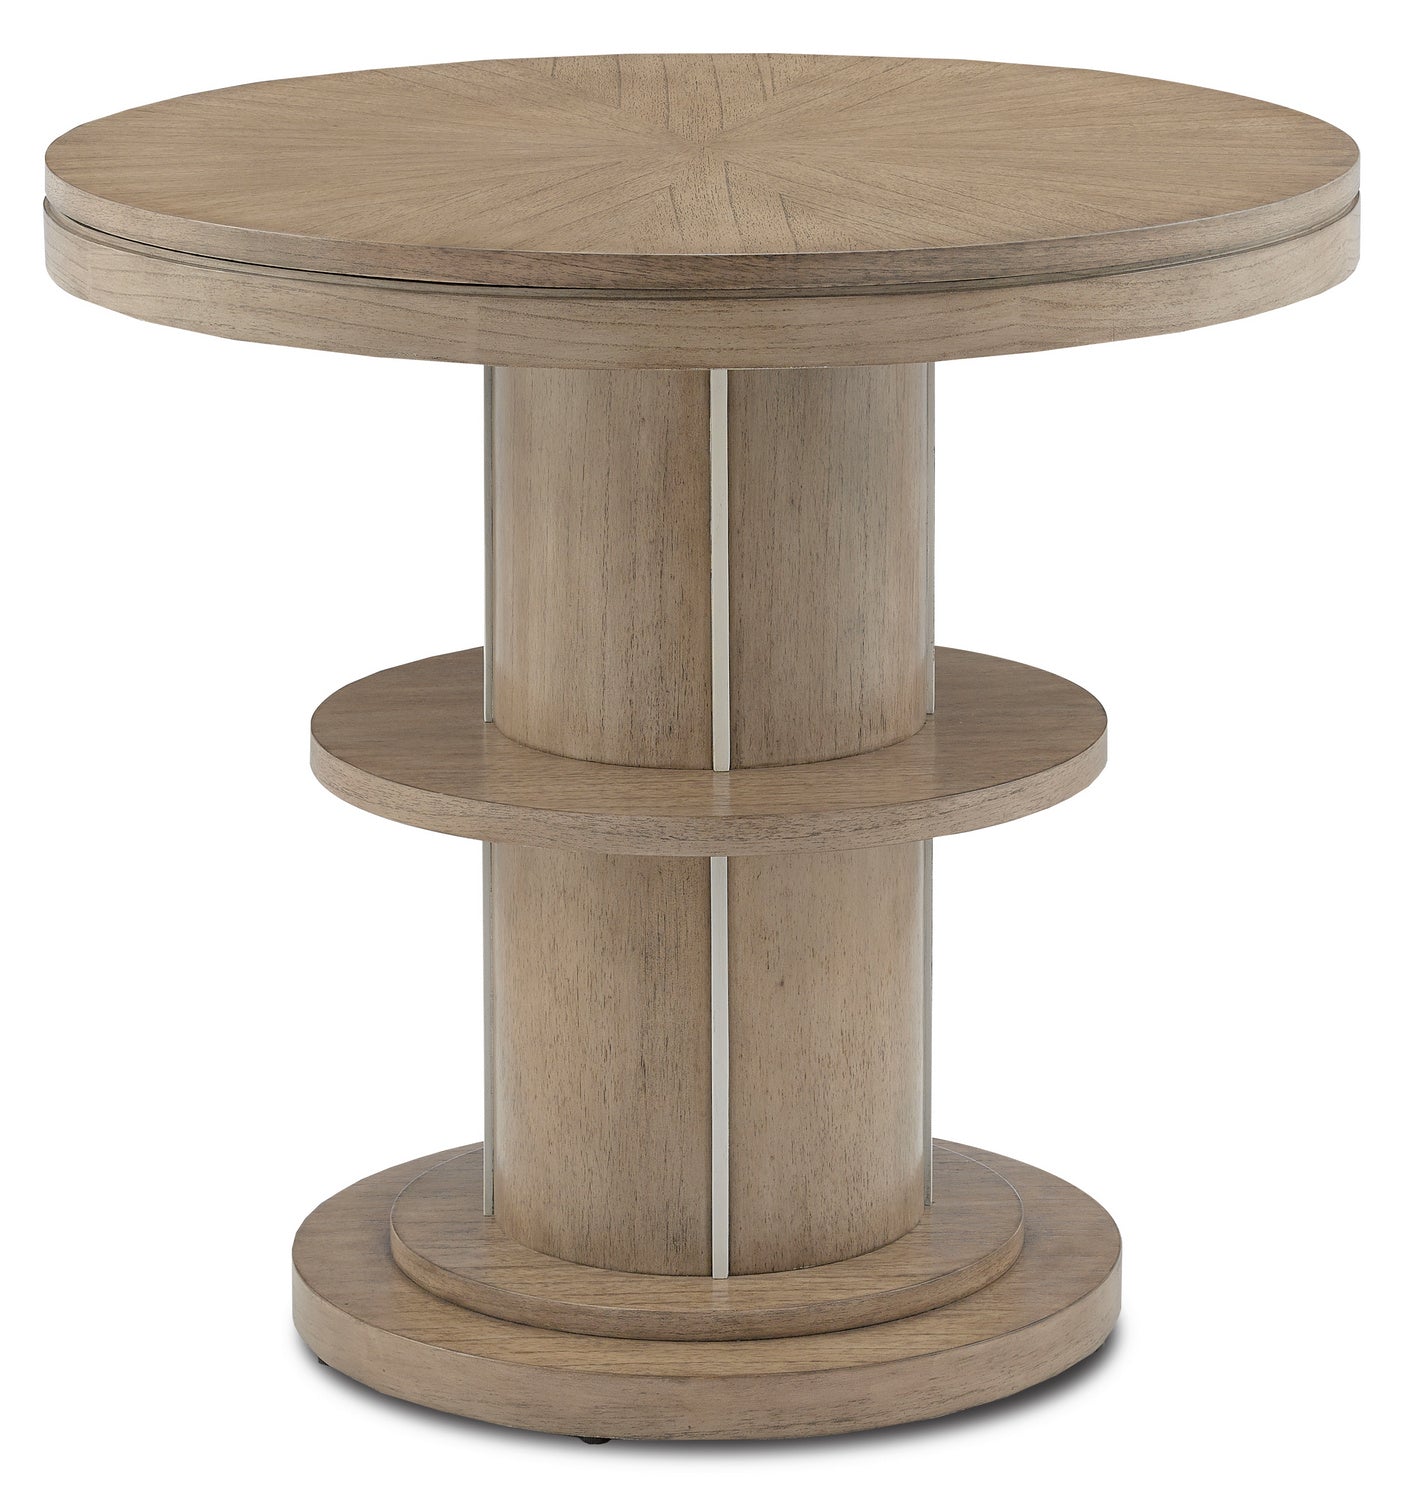 Entry Table from the Tuban collection in Light Wheat/Ivory finish